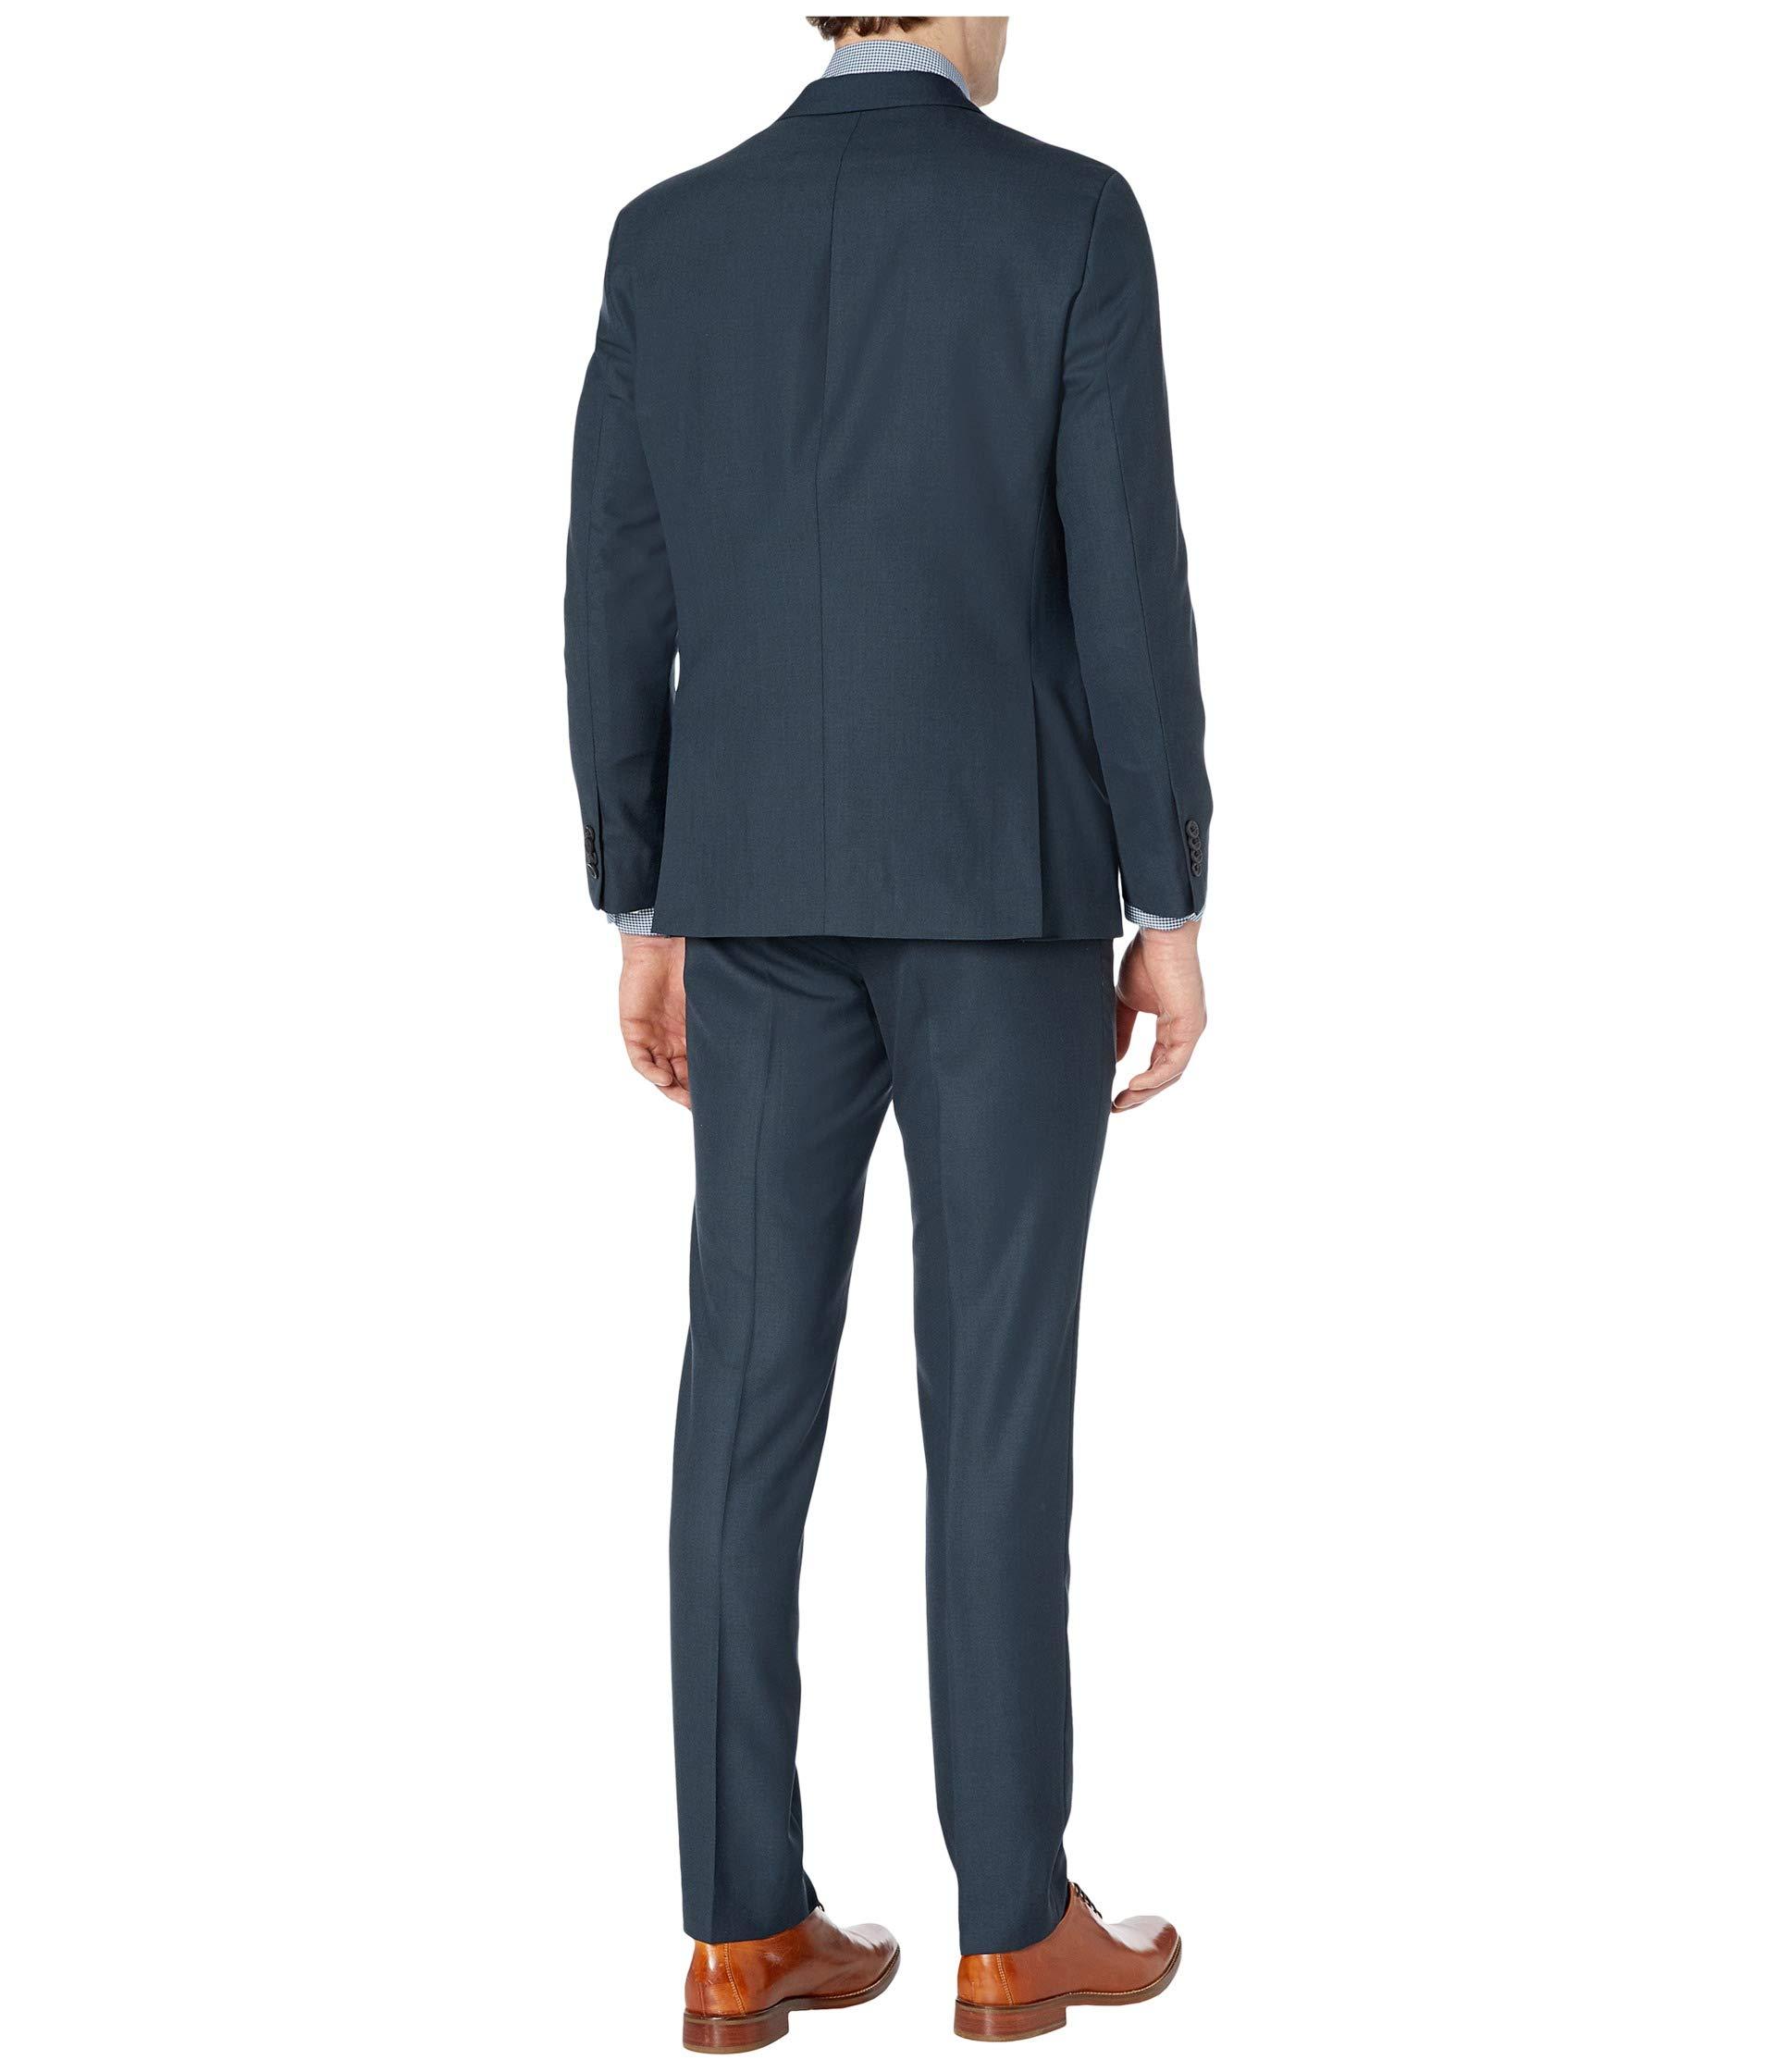 Unlisted by Kenneth Cole Mens Suit Separates Jacket and Pant 